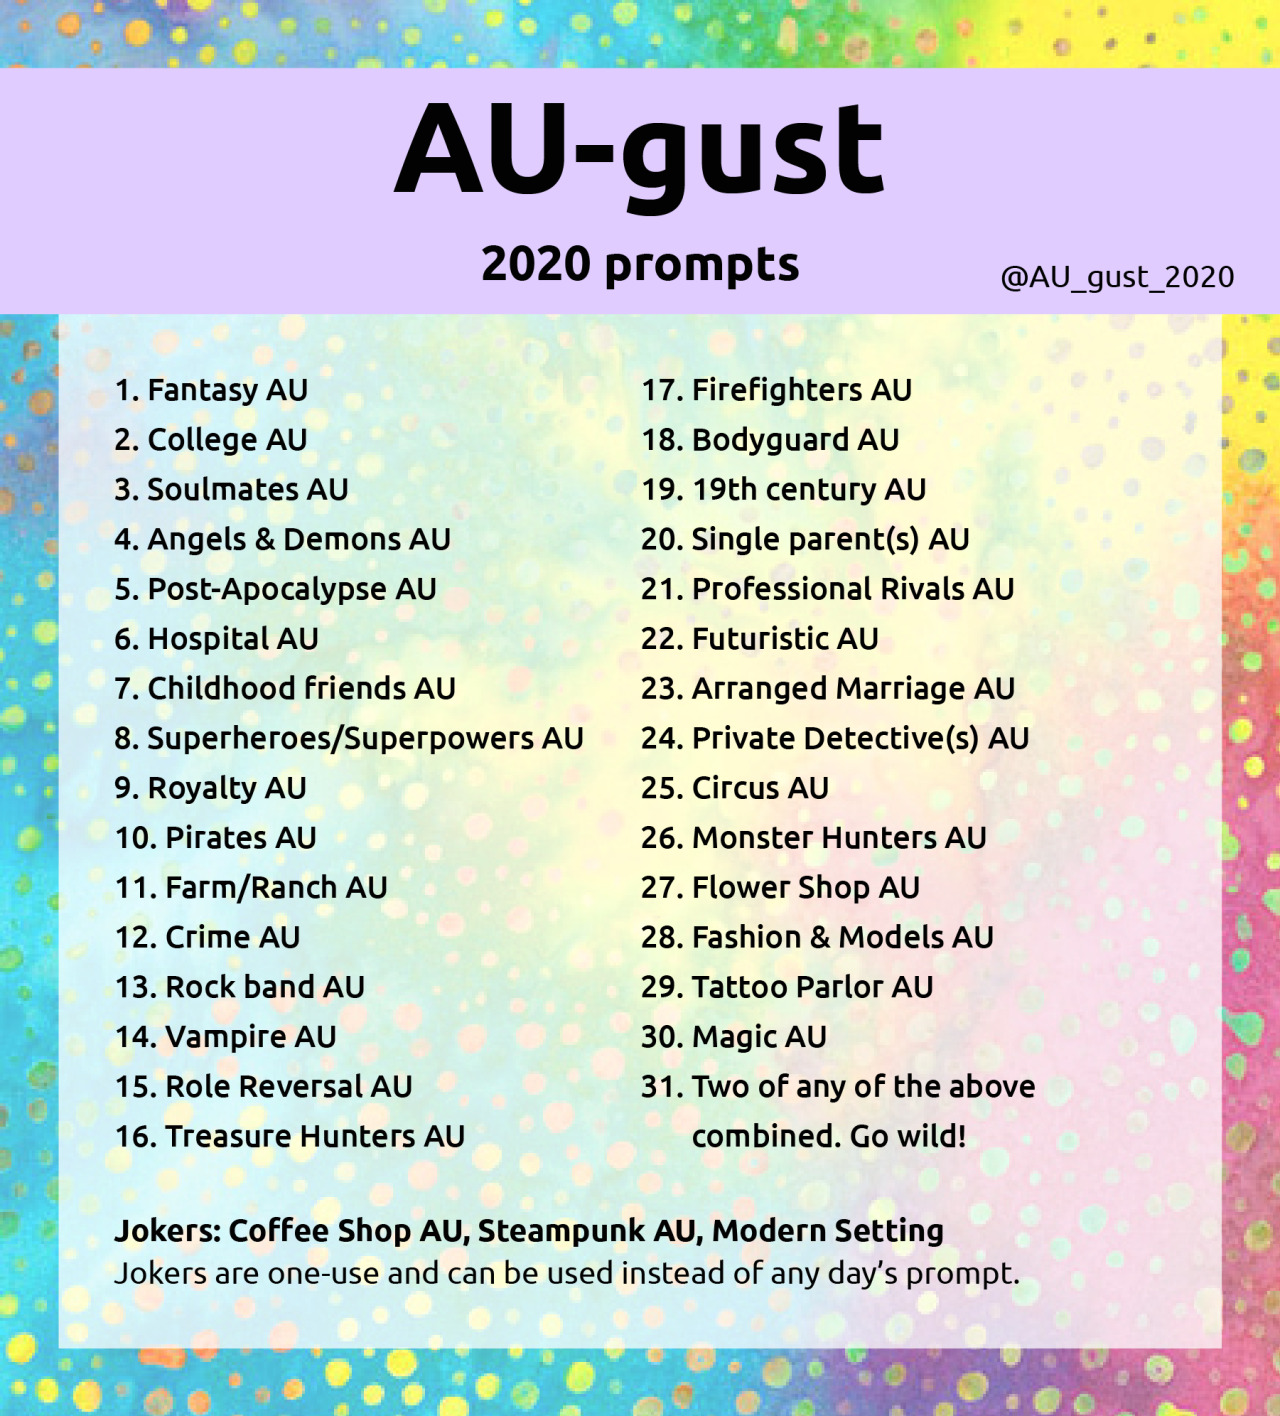 AU-gust Writing Challenge — The list of prompts was completed! One